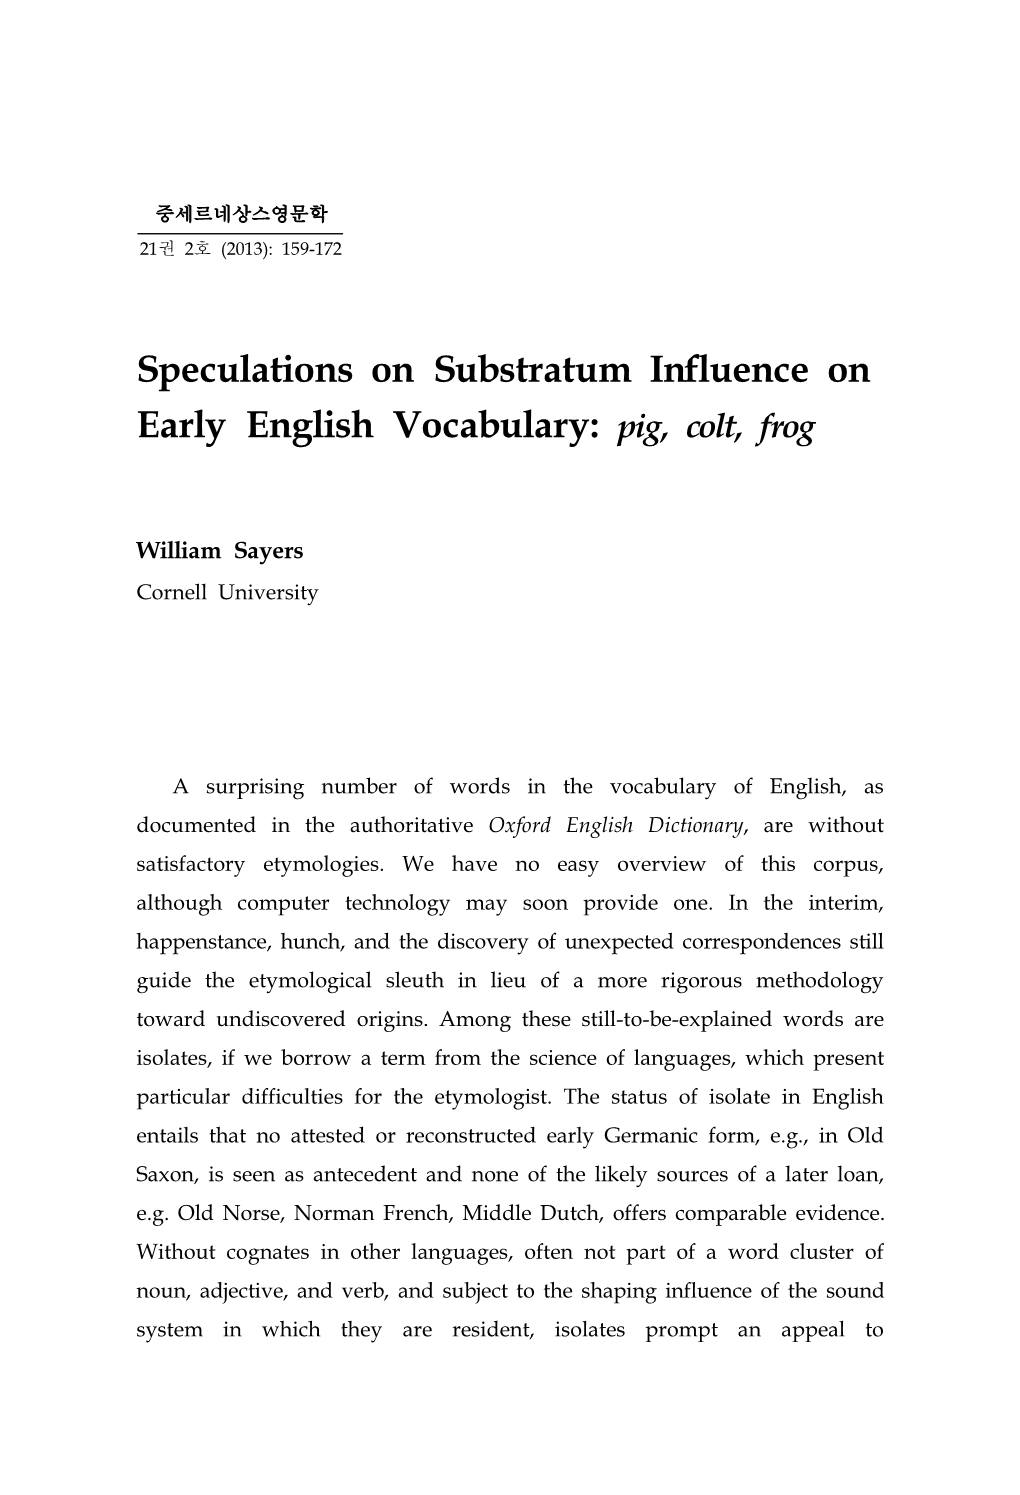 Speculations on Substratum Influence on Early English Vocabulary: Pig, Colt, Frog